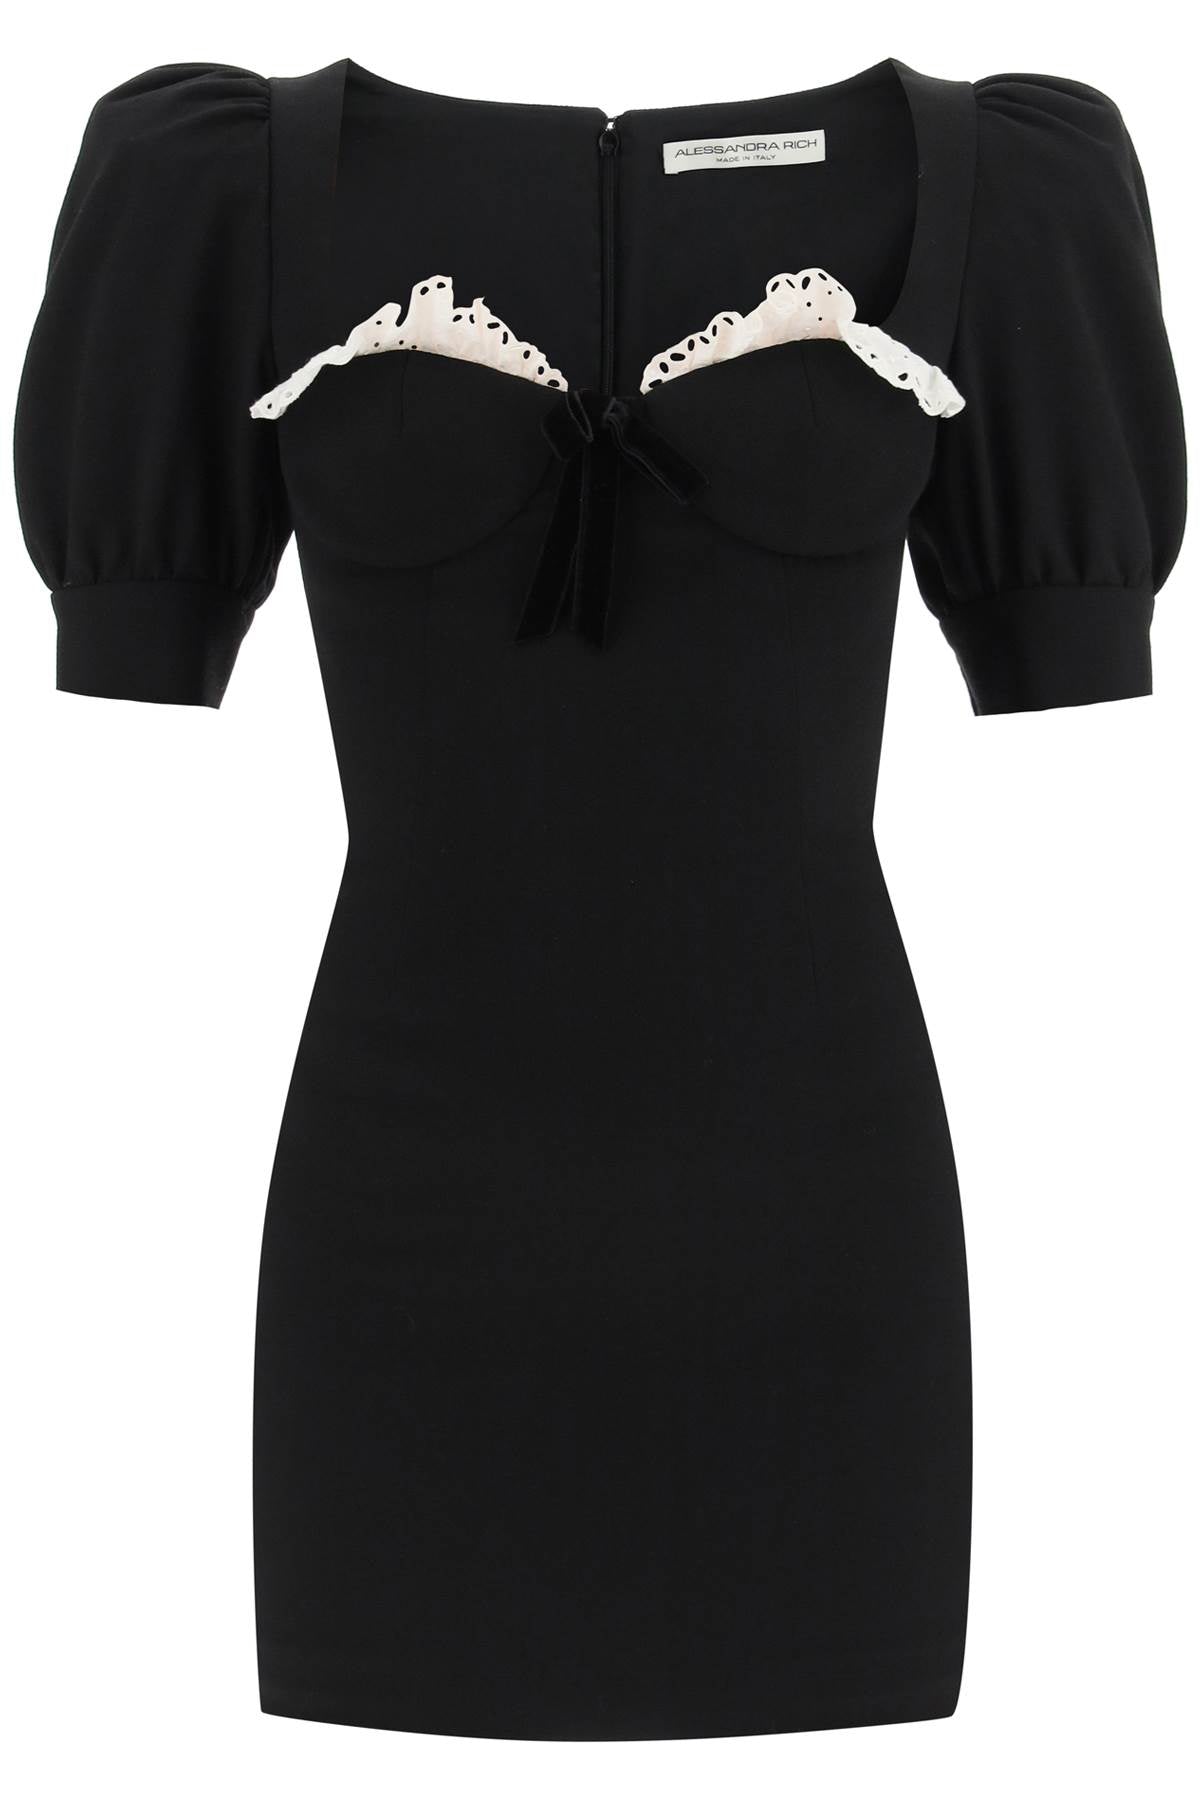 Alessandra rich mini dress with lace-women > clothing > dresses-Alessandra Rich-Urbanheer